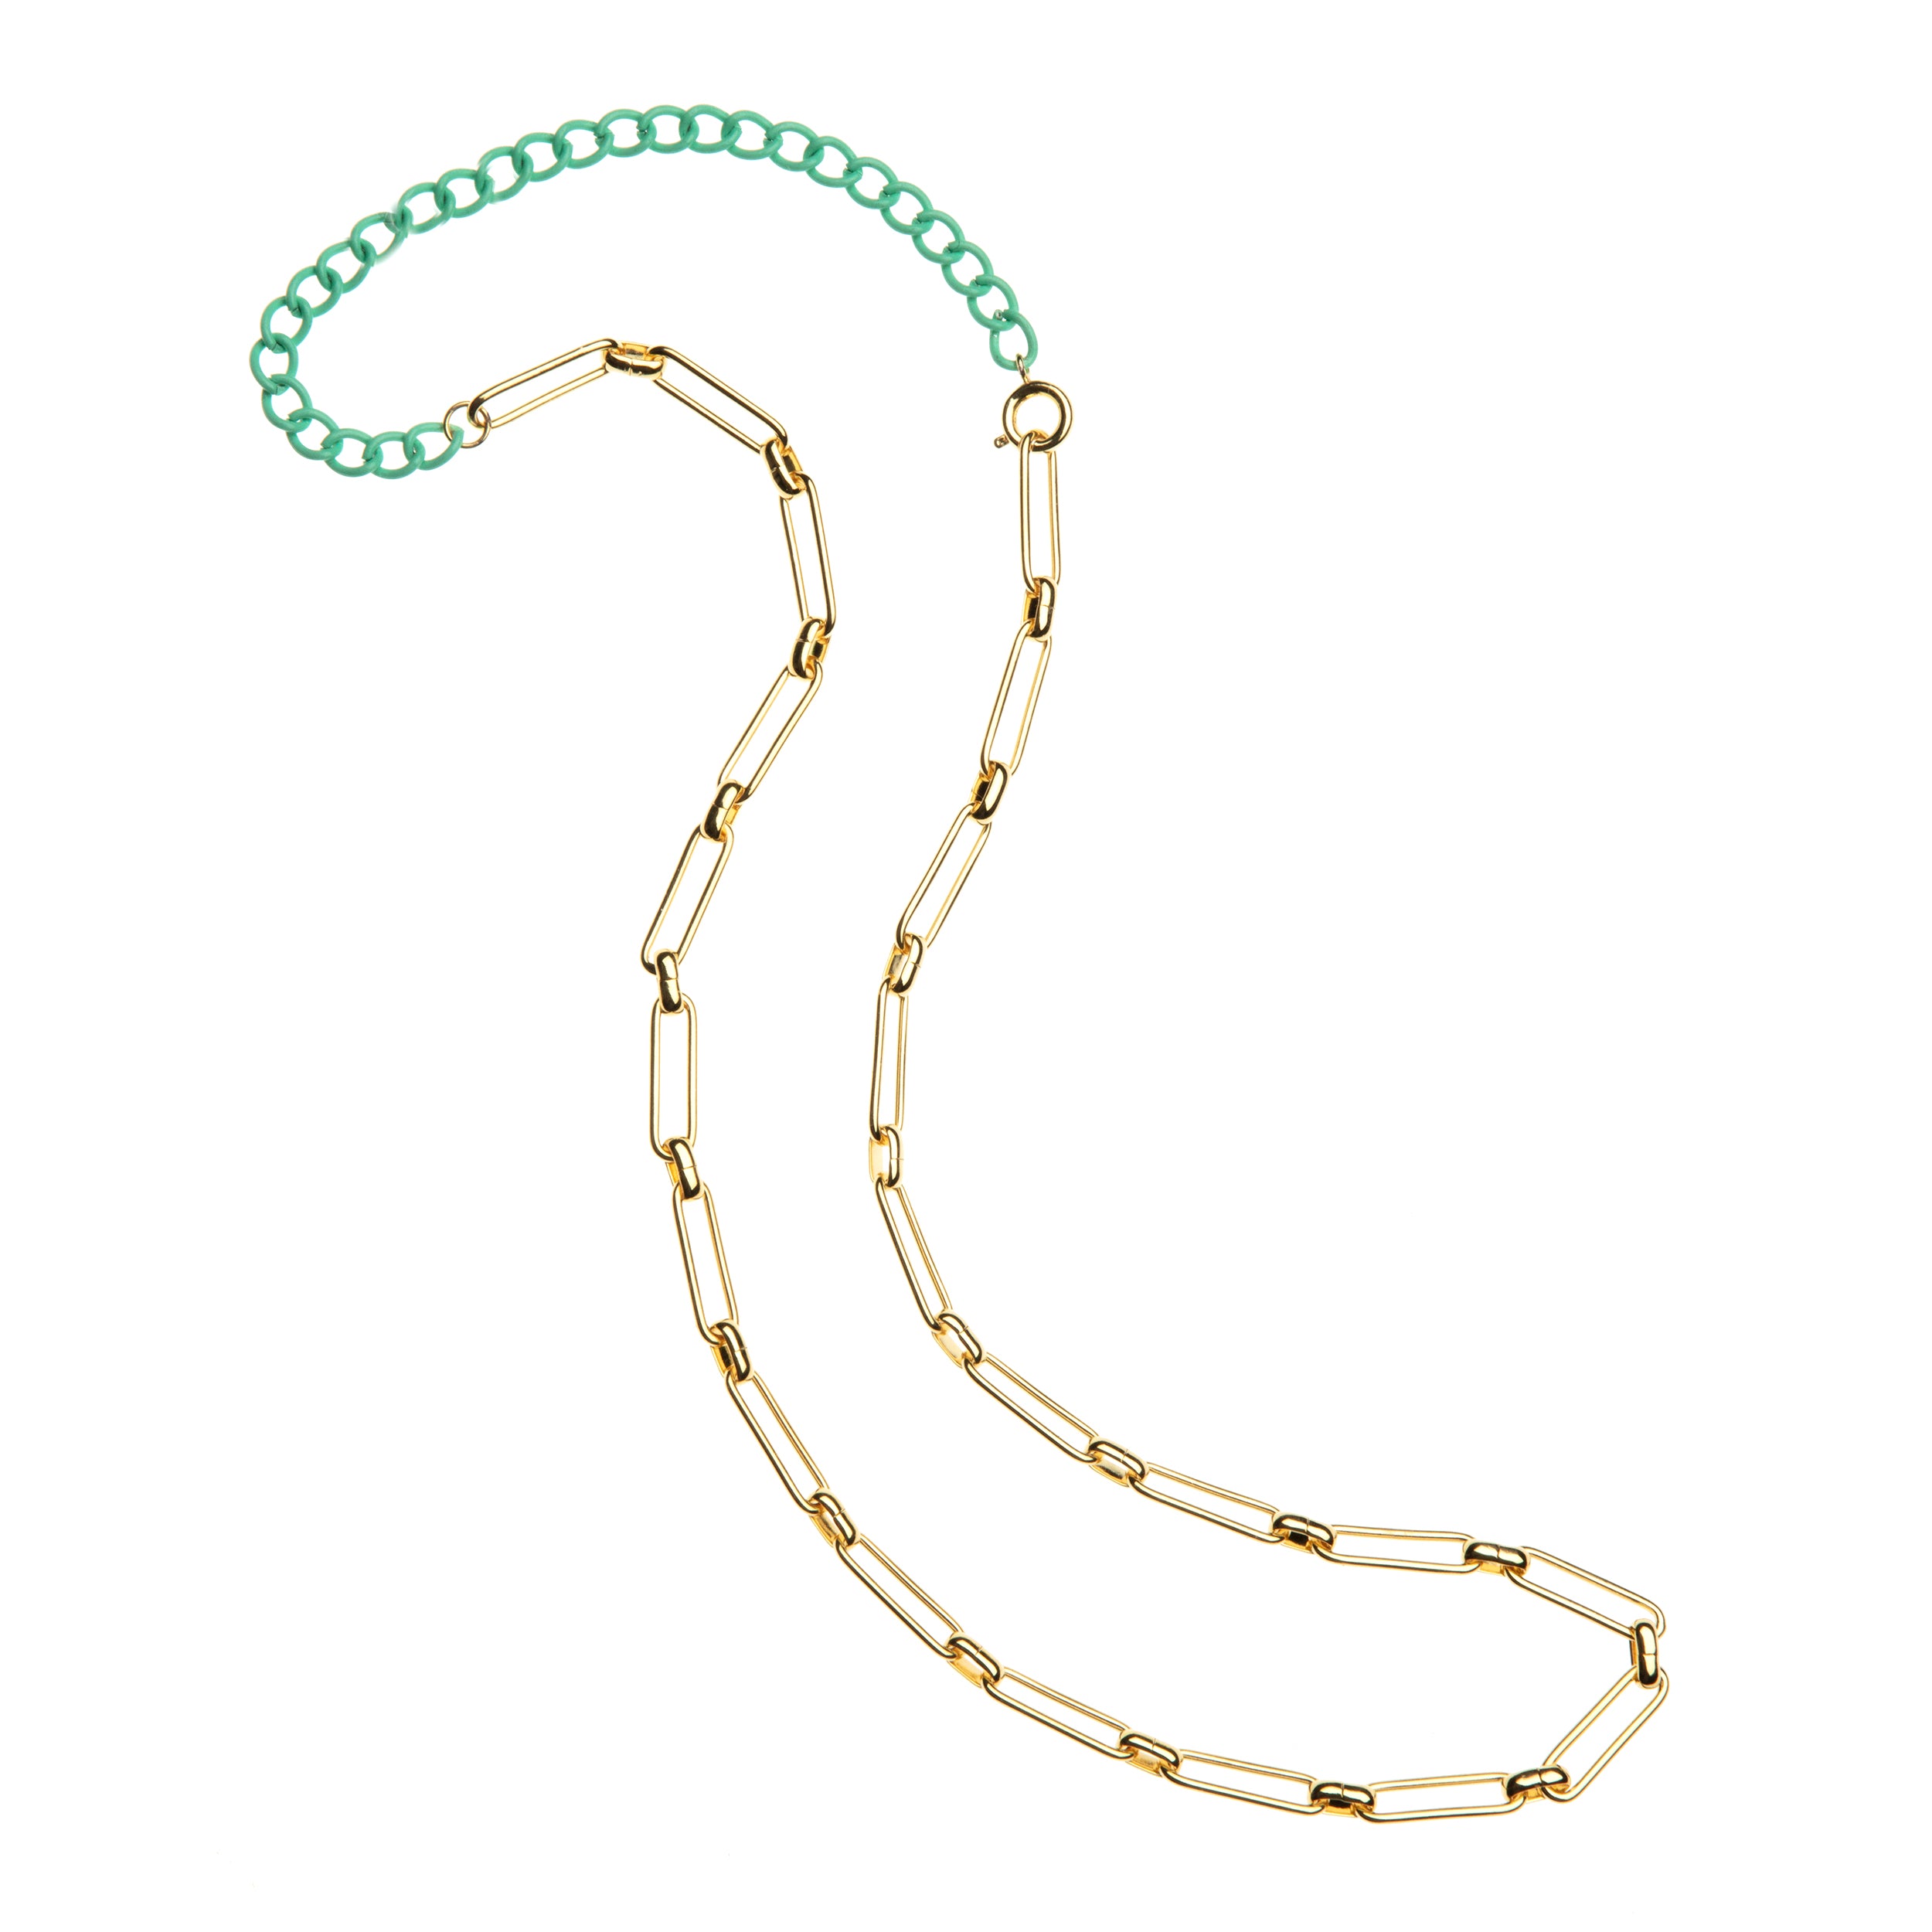 Gold and Enamel Mixed Chain Necklace